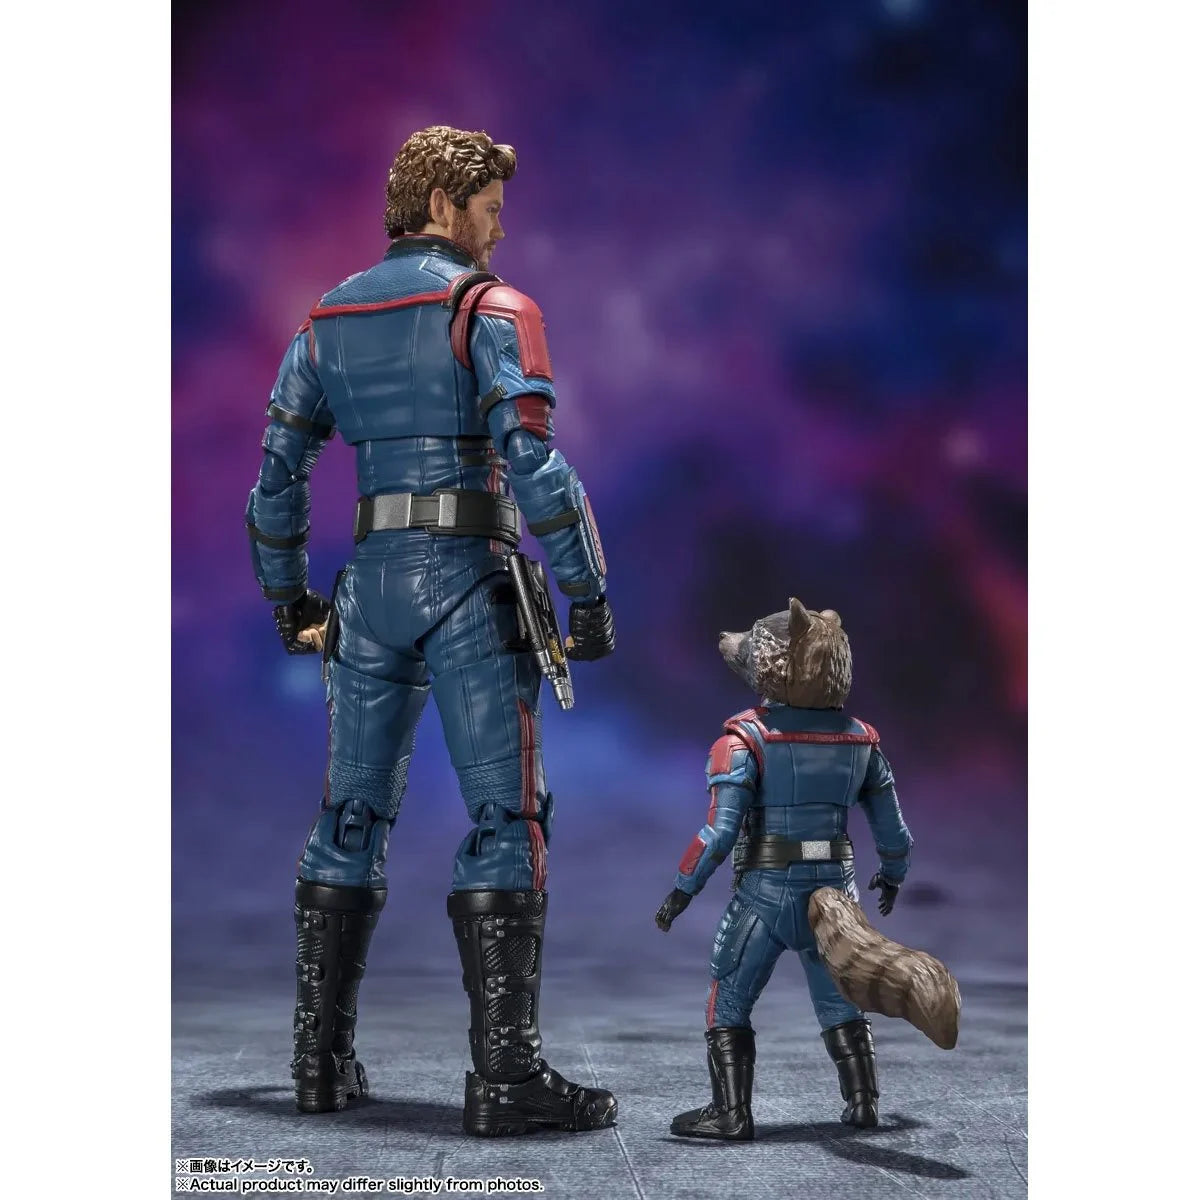 Guardians Galaxy Vol. 3 Star-Lord and Rocket Action FIgures by S.H.Figuarts -SH Figuarts - India - www.superherotoystore.com